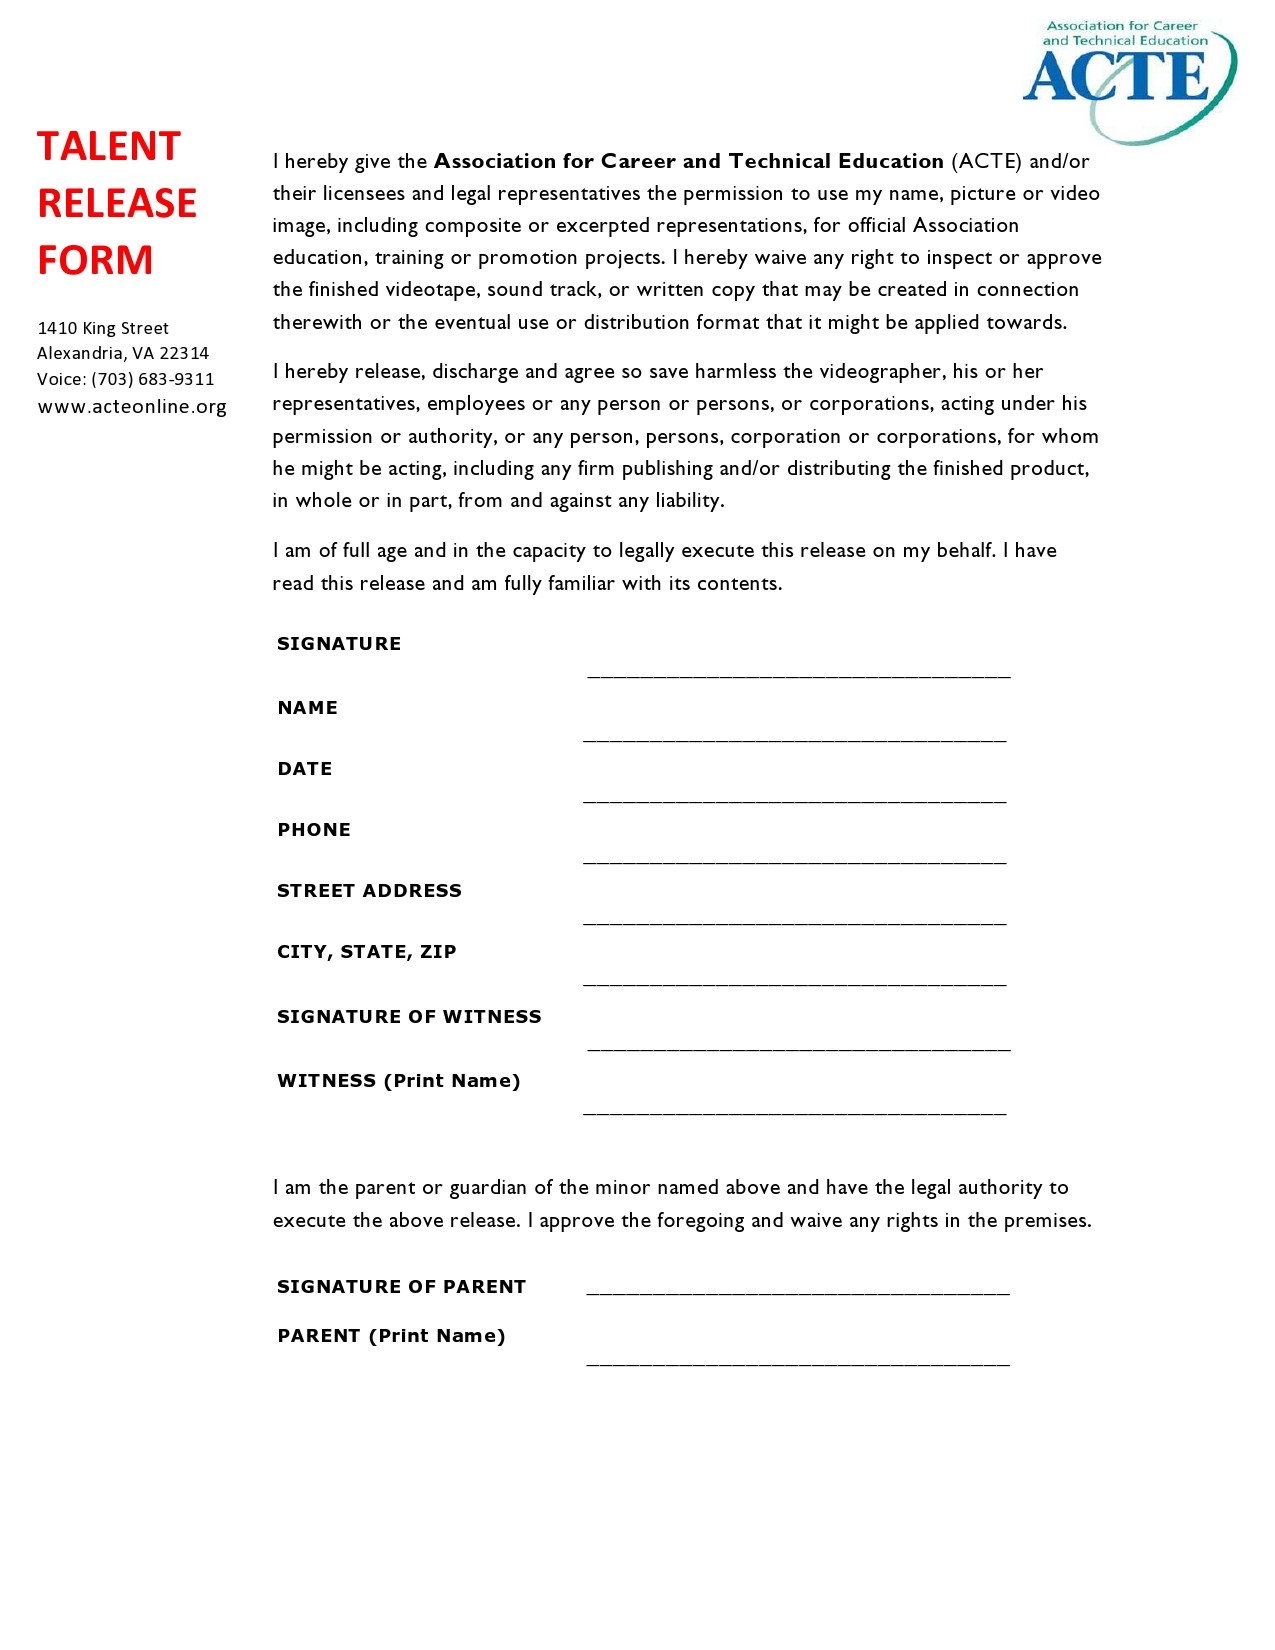 Free talent release form 27